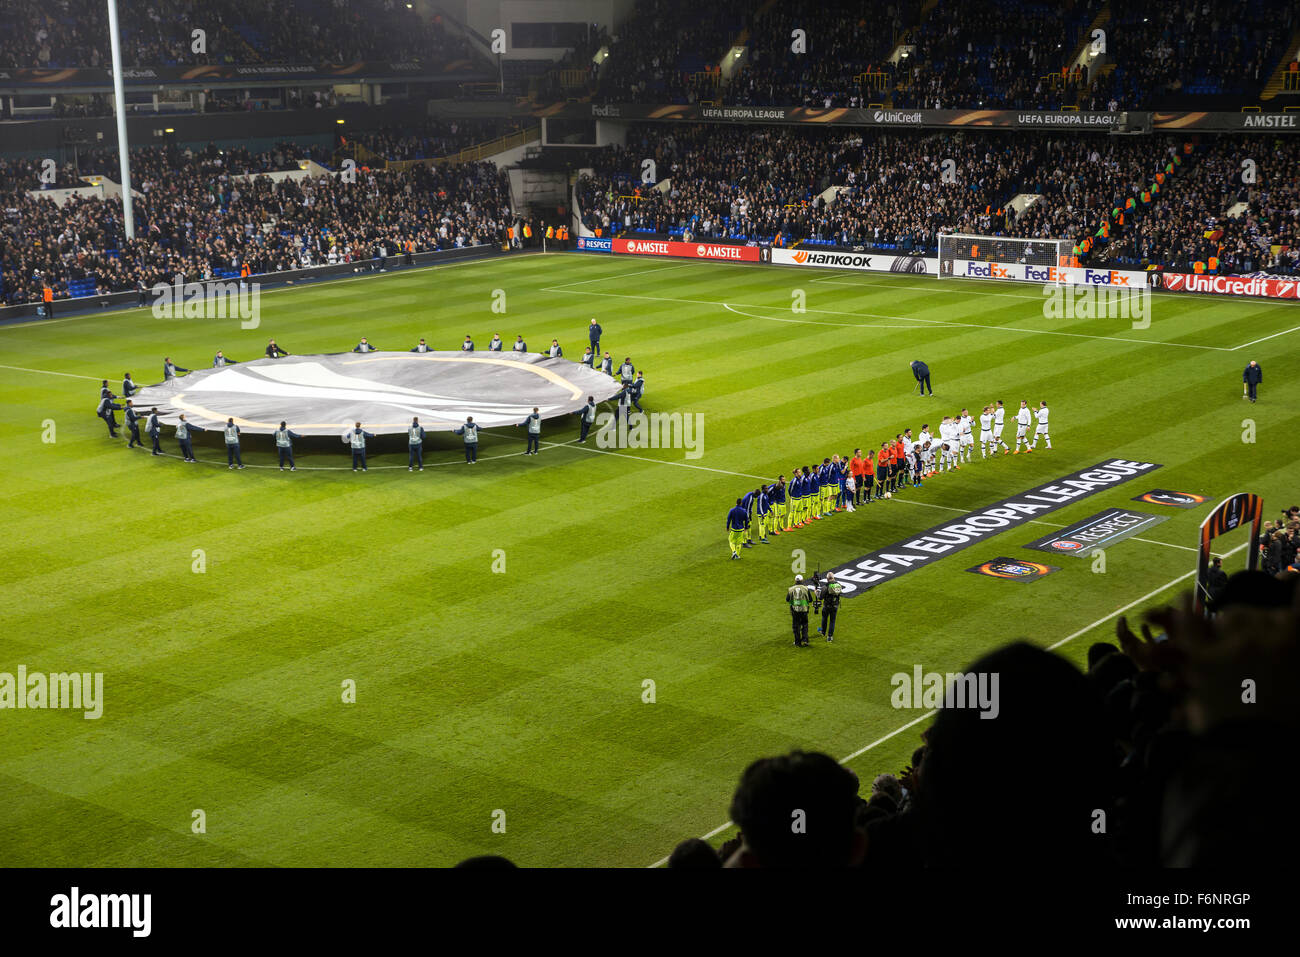 Tottenham Hotspur v R.S.C. Anderlecht in the group stages of the Europa League at White Hart Lane, London, UK, 5th November 2015 Stock Photo